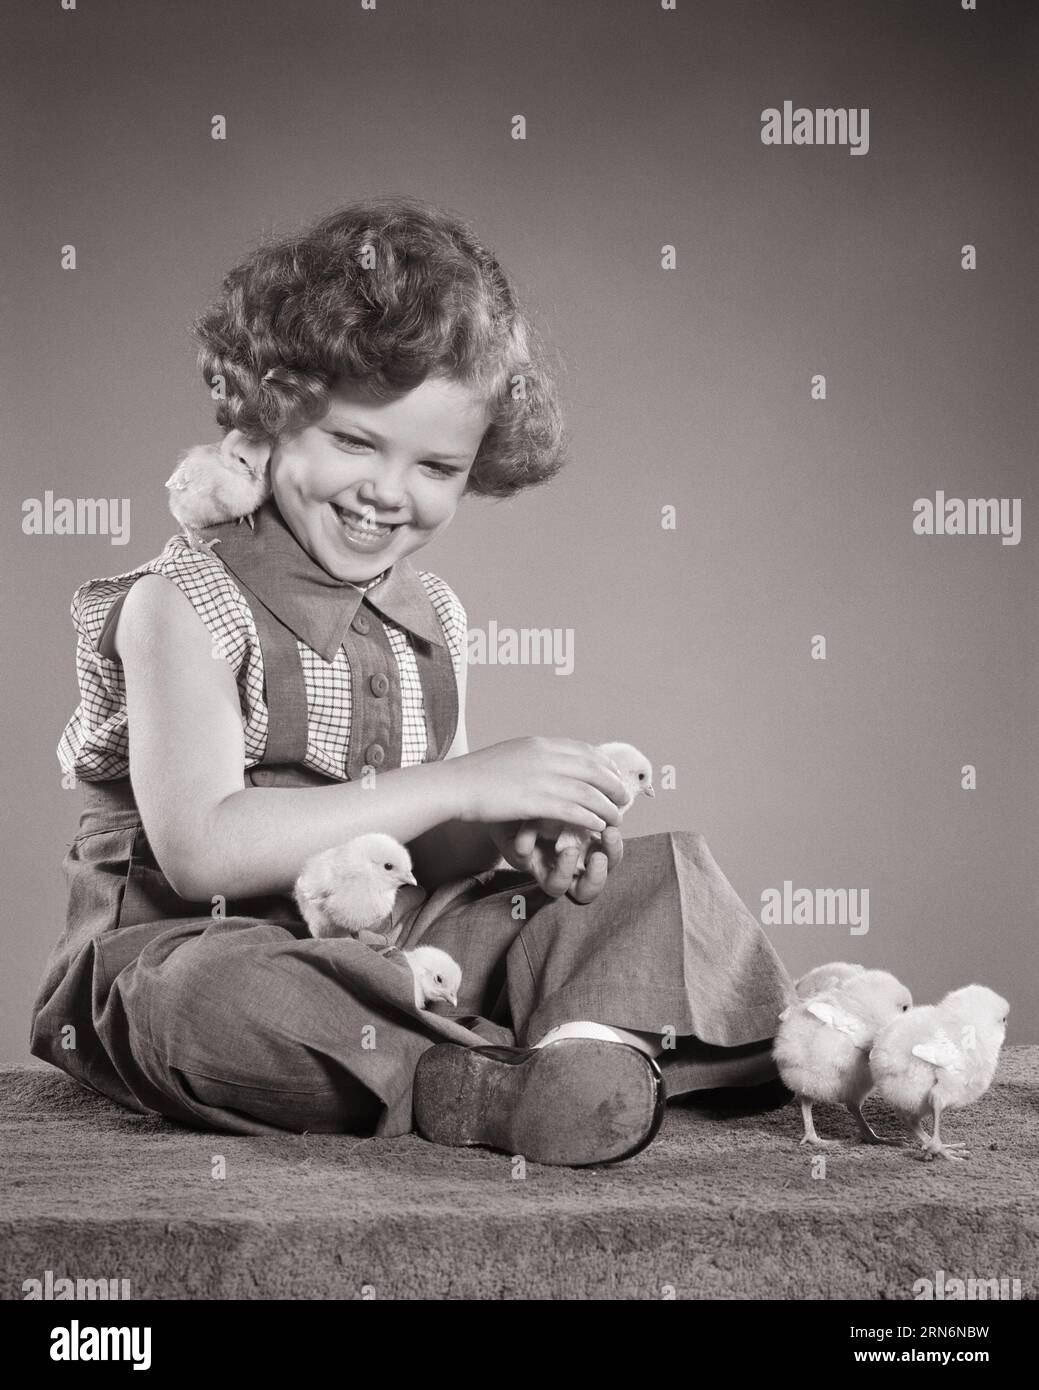 1950s LITTLE GIRL SITTING WITH BABY CHICKS HOLDING ONE ANOTHER IS ON HER SHOULDER 4 MORE ROAMING AROUND - p1035 HAR001 HARS JOY BIRDS FEMALES EASTER WINNING STUDIO SHOT COPY SPACE FULL-LENGTH B&W WING HUMOROUS HAPPINESS ANIMAL BABIES CHEERFUL DISCOVERY EXCITEMENT BABY ANIMALS SMILES JOYFUL VERTEBRATE WARM-BLOODED ROAMING PLEASANT AGREEABLE ANOTHER CHARMING FEATHERED JUVENILES LOVABLE PEEPS PLEASING SPRING SEASON SPRINGTIME WINGED ADORABLE APPEALING BIPEDAL BLACK AND WHITE CAUCASIAN ETHNICITY CHICKS EGG-LAYING HAR001 OLD FASHIONED Stock Photo